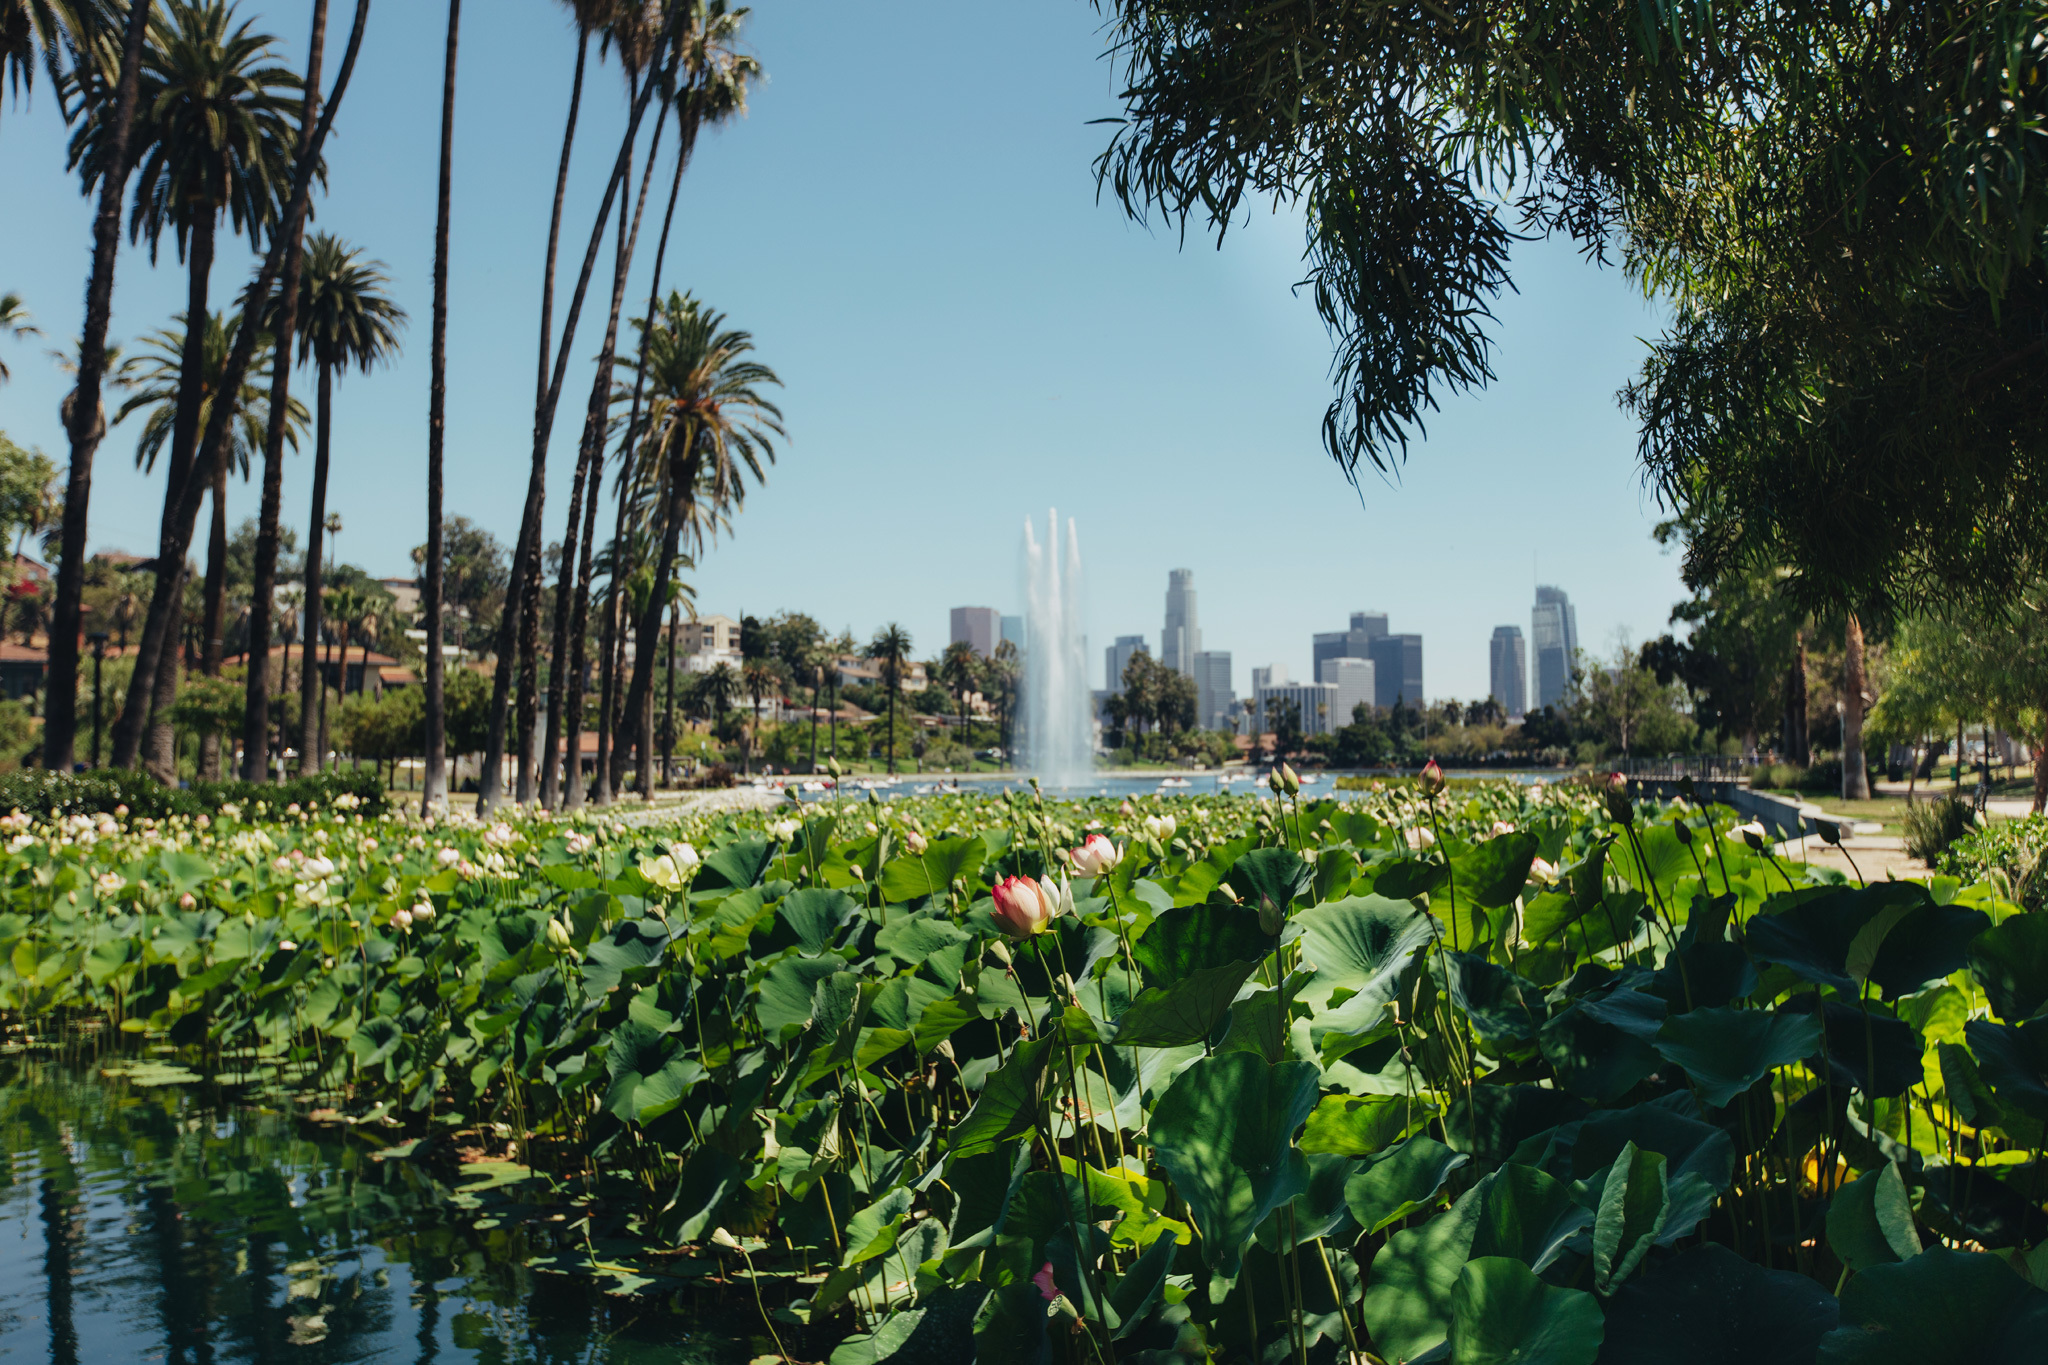 los angeles parks to visit